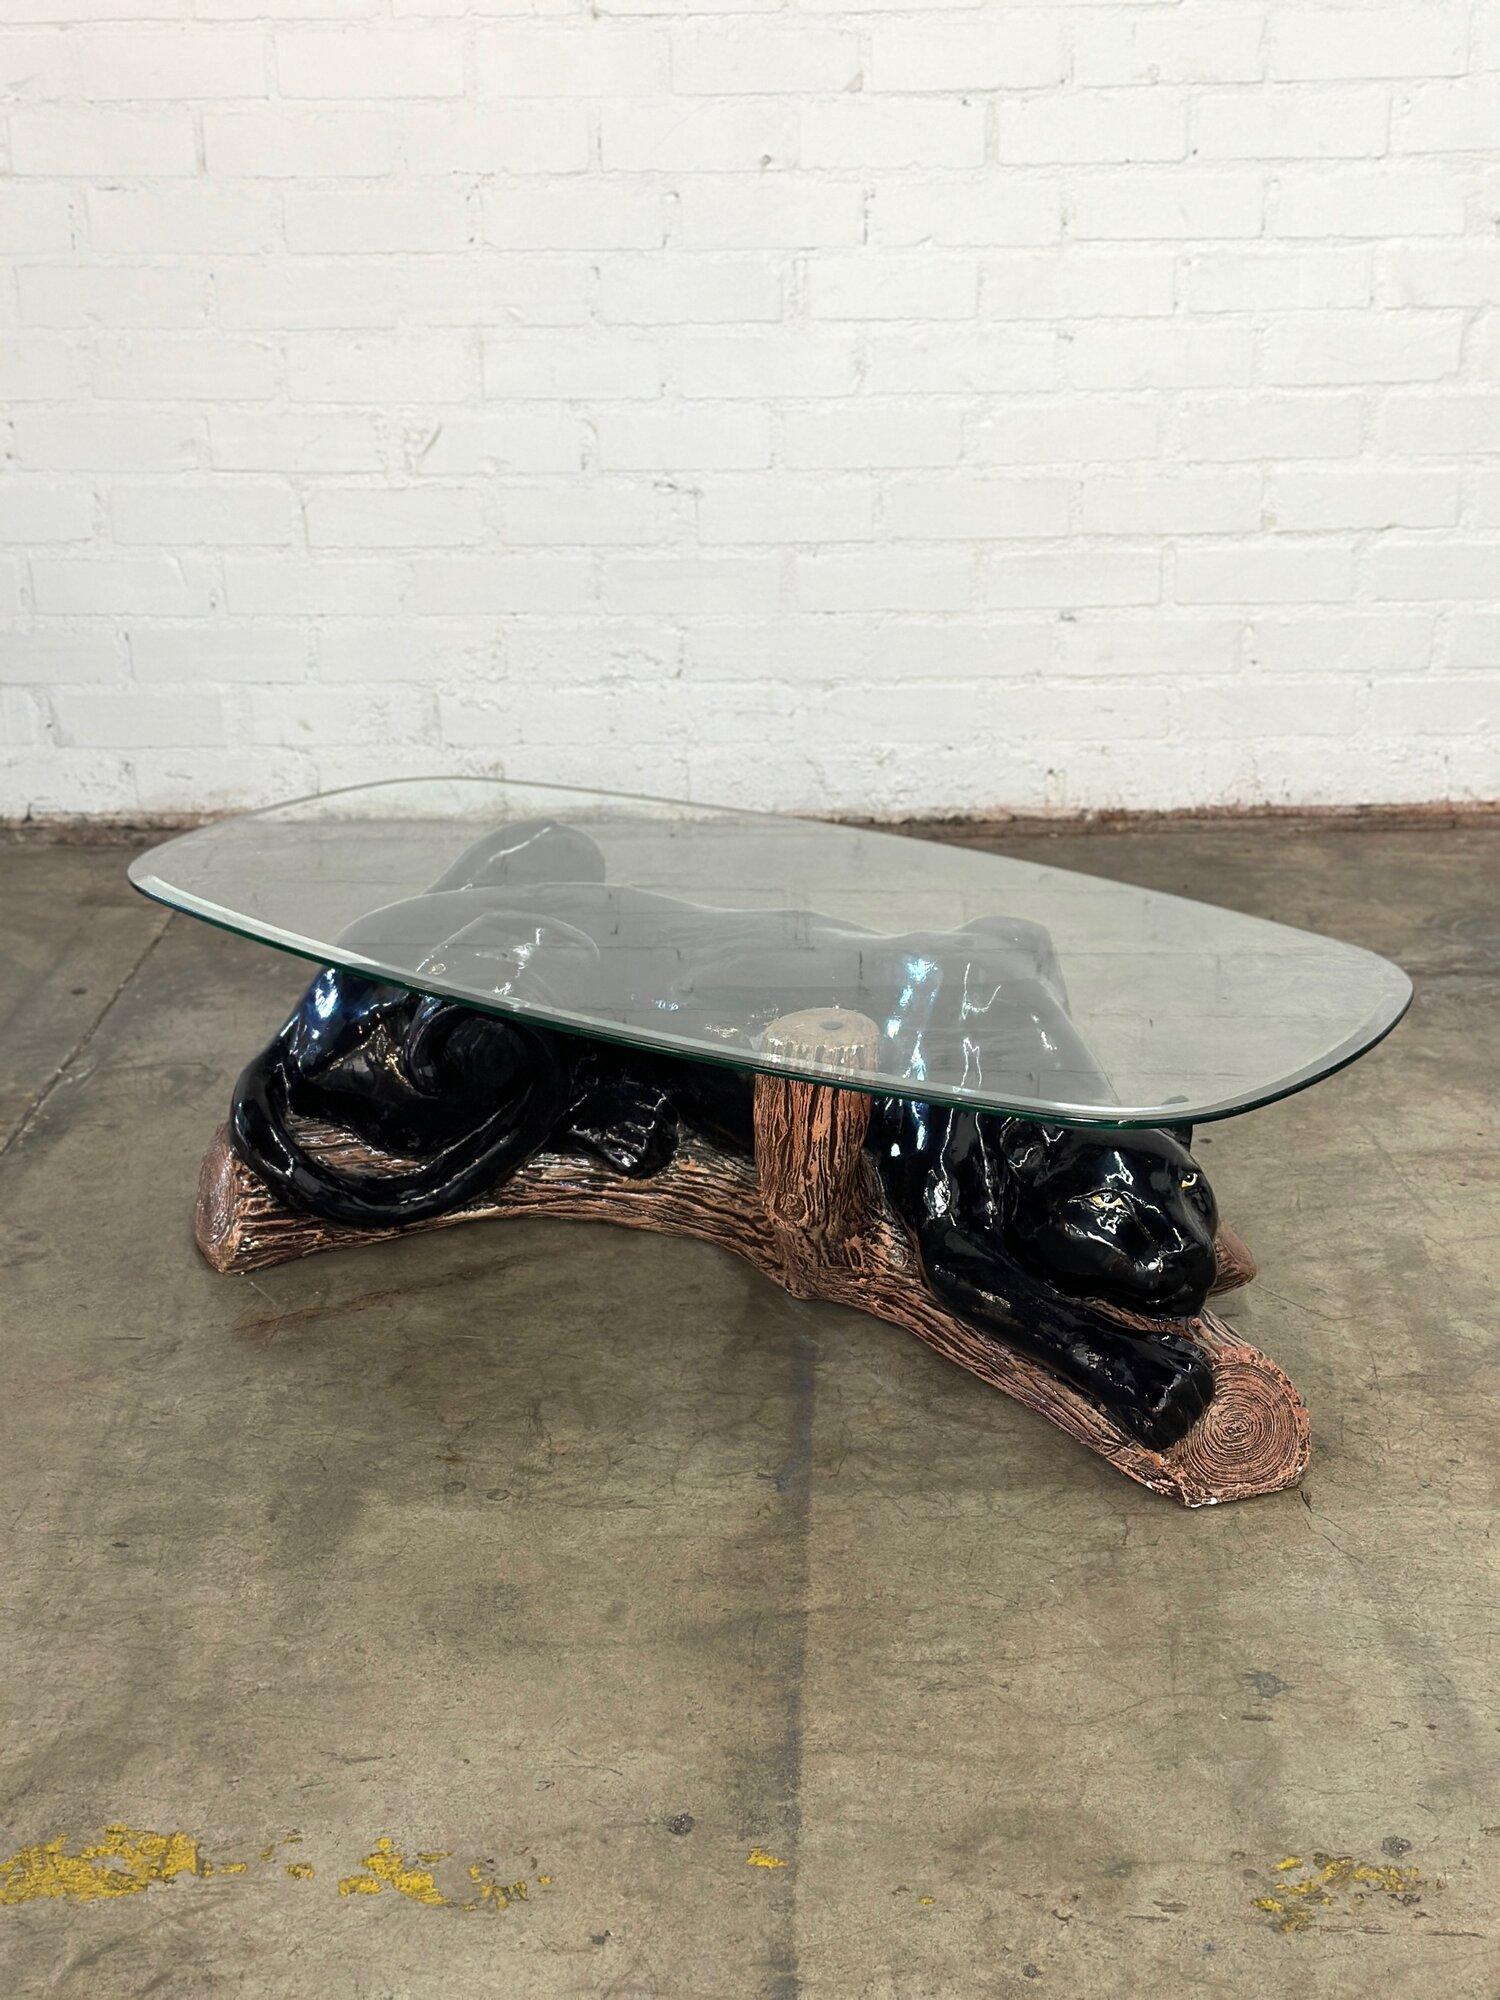 W52 D26 H15

Post Modern Panther Coffee Table. Featuring a black panther made from ceramic with a glass oval top. Table has some areas of wear that have been pictured.

